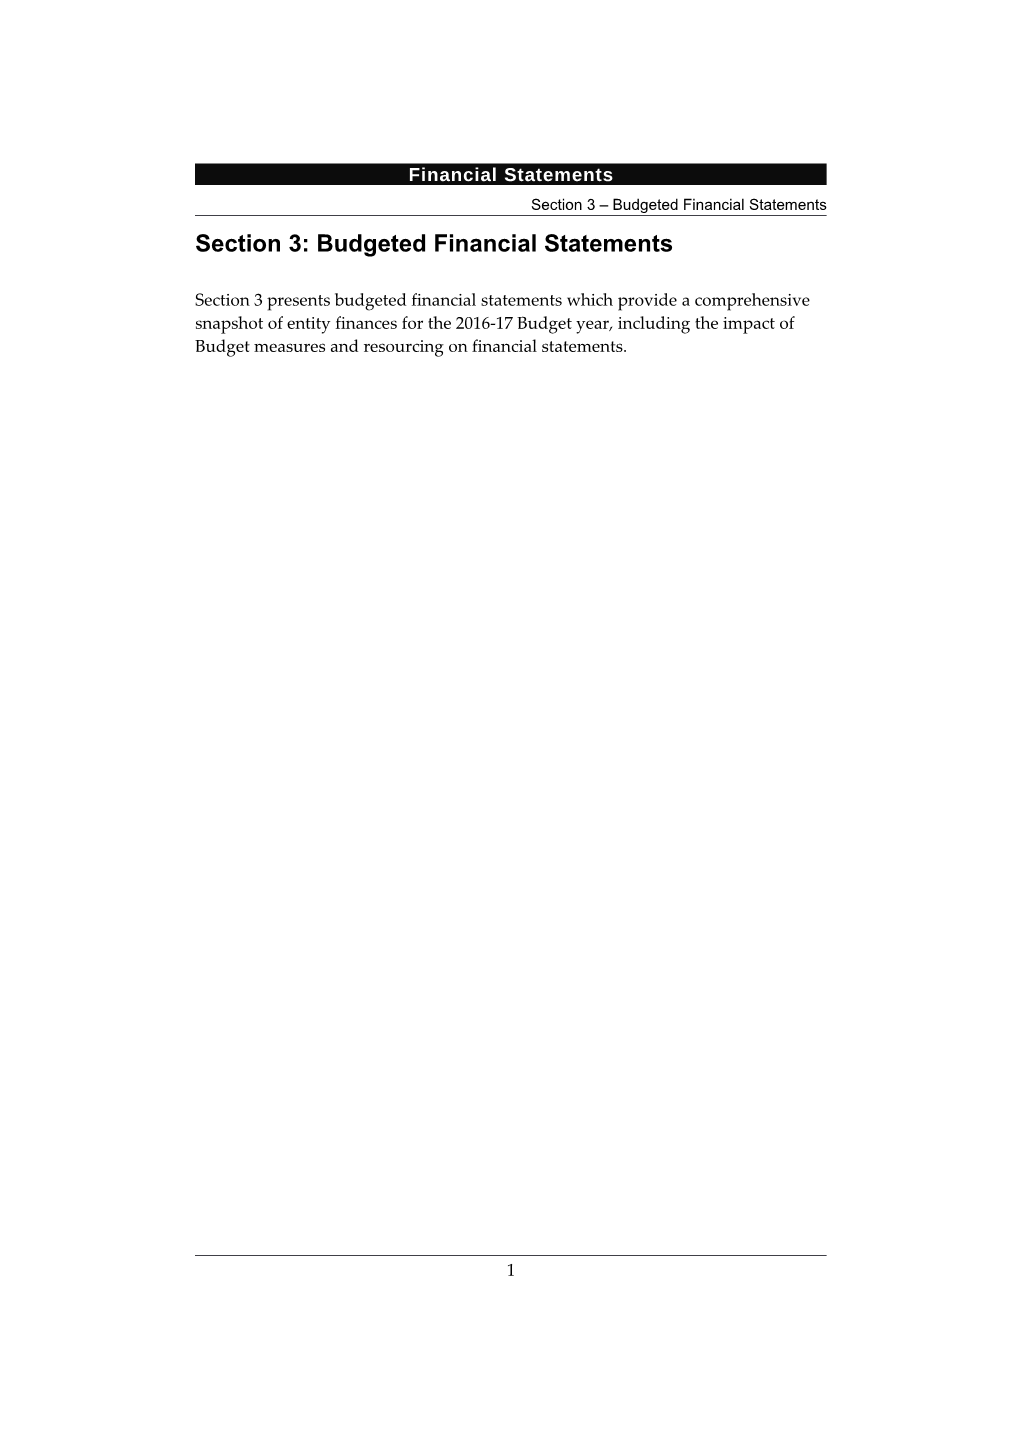 Section 3: Budgeted Financial Statements